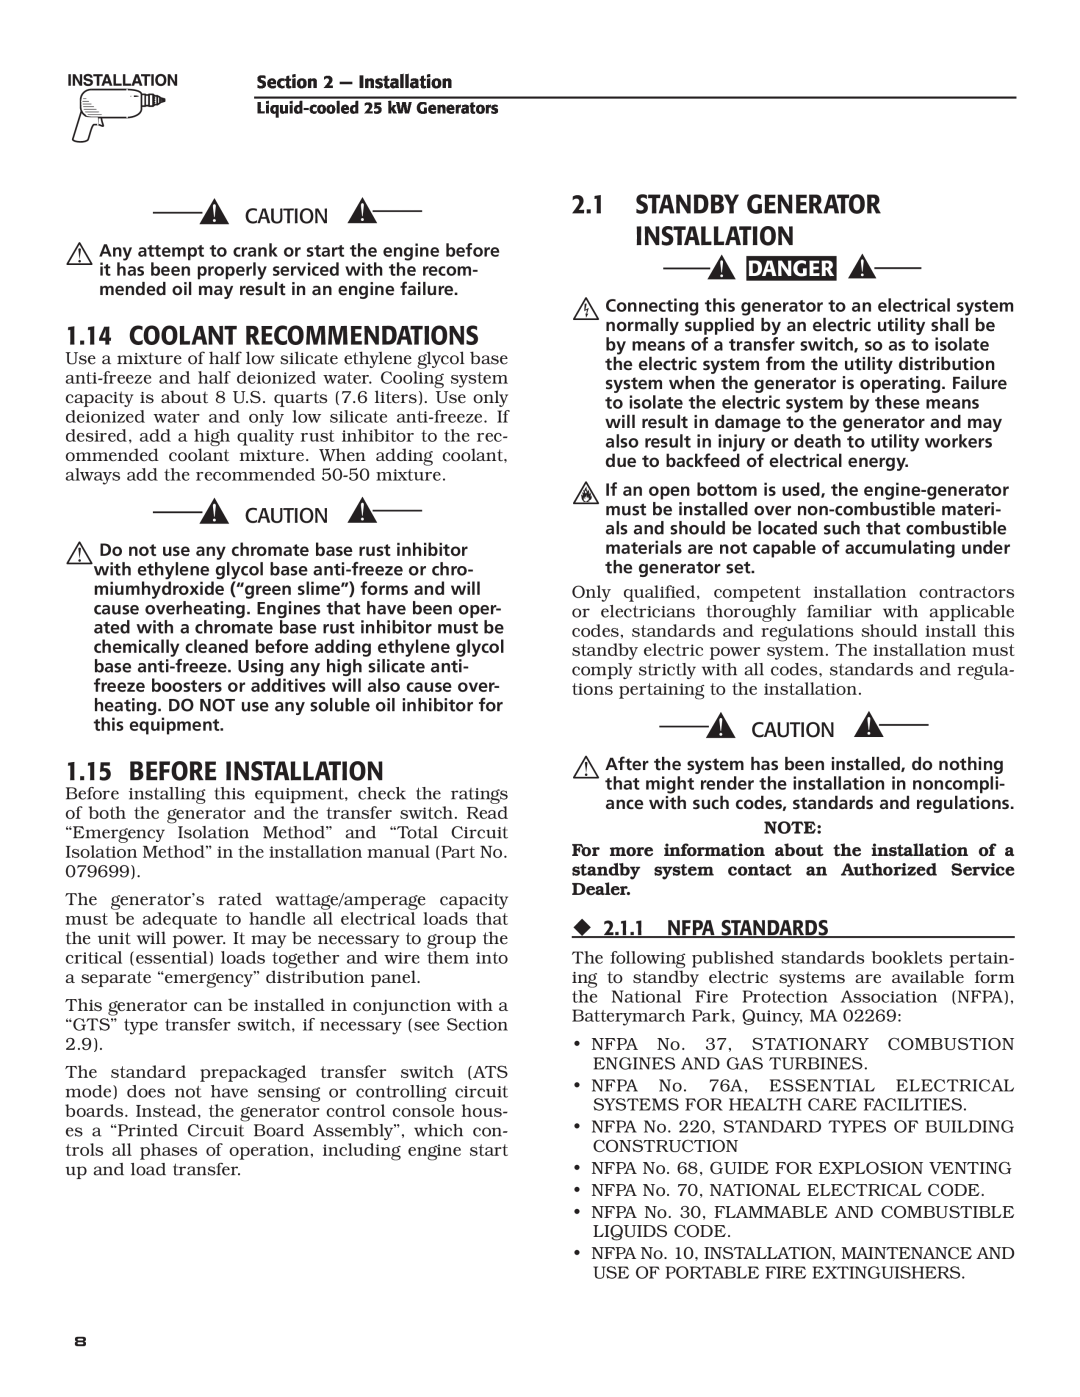 Generac 005031-2 Coolant Recommendations, 2.1STANDBY GENERATOR INSTALLATION, Before Installation, ‹2.1.1 NFPA STANDARDS 